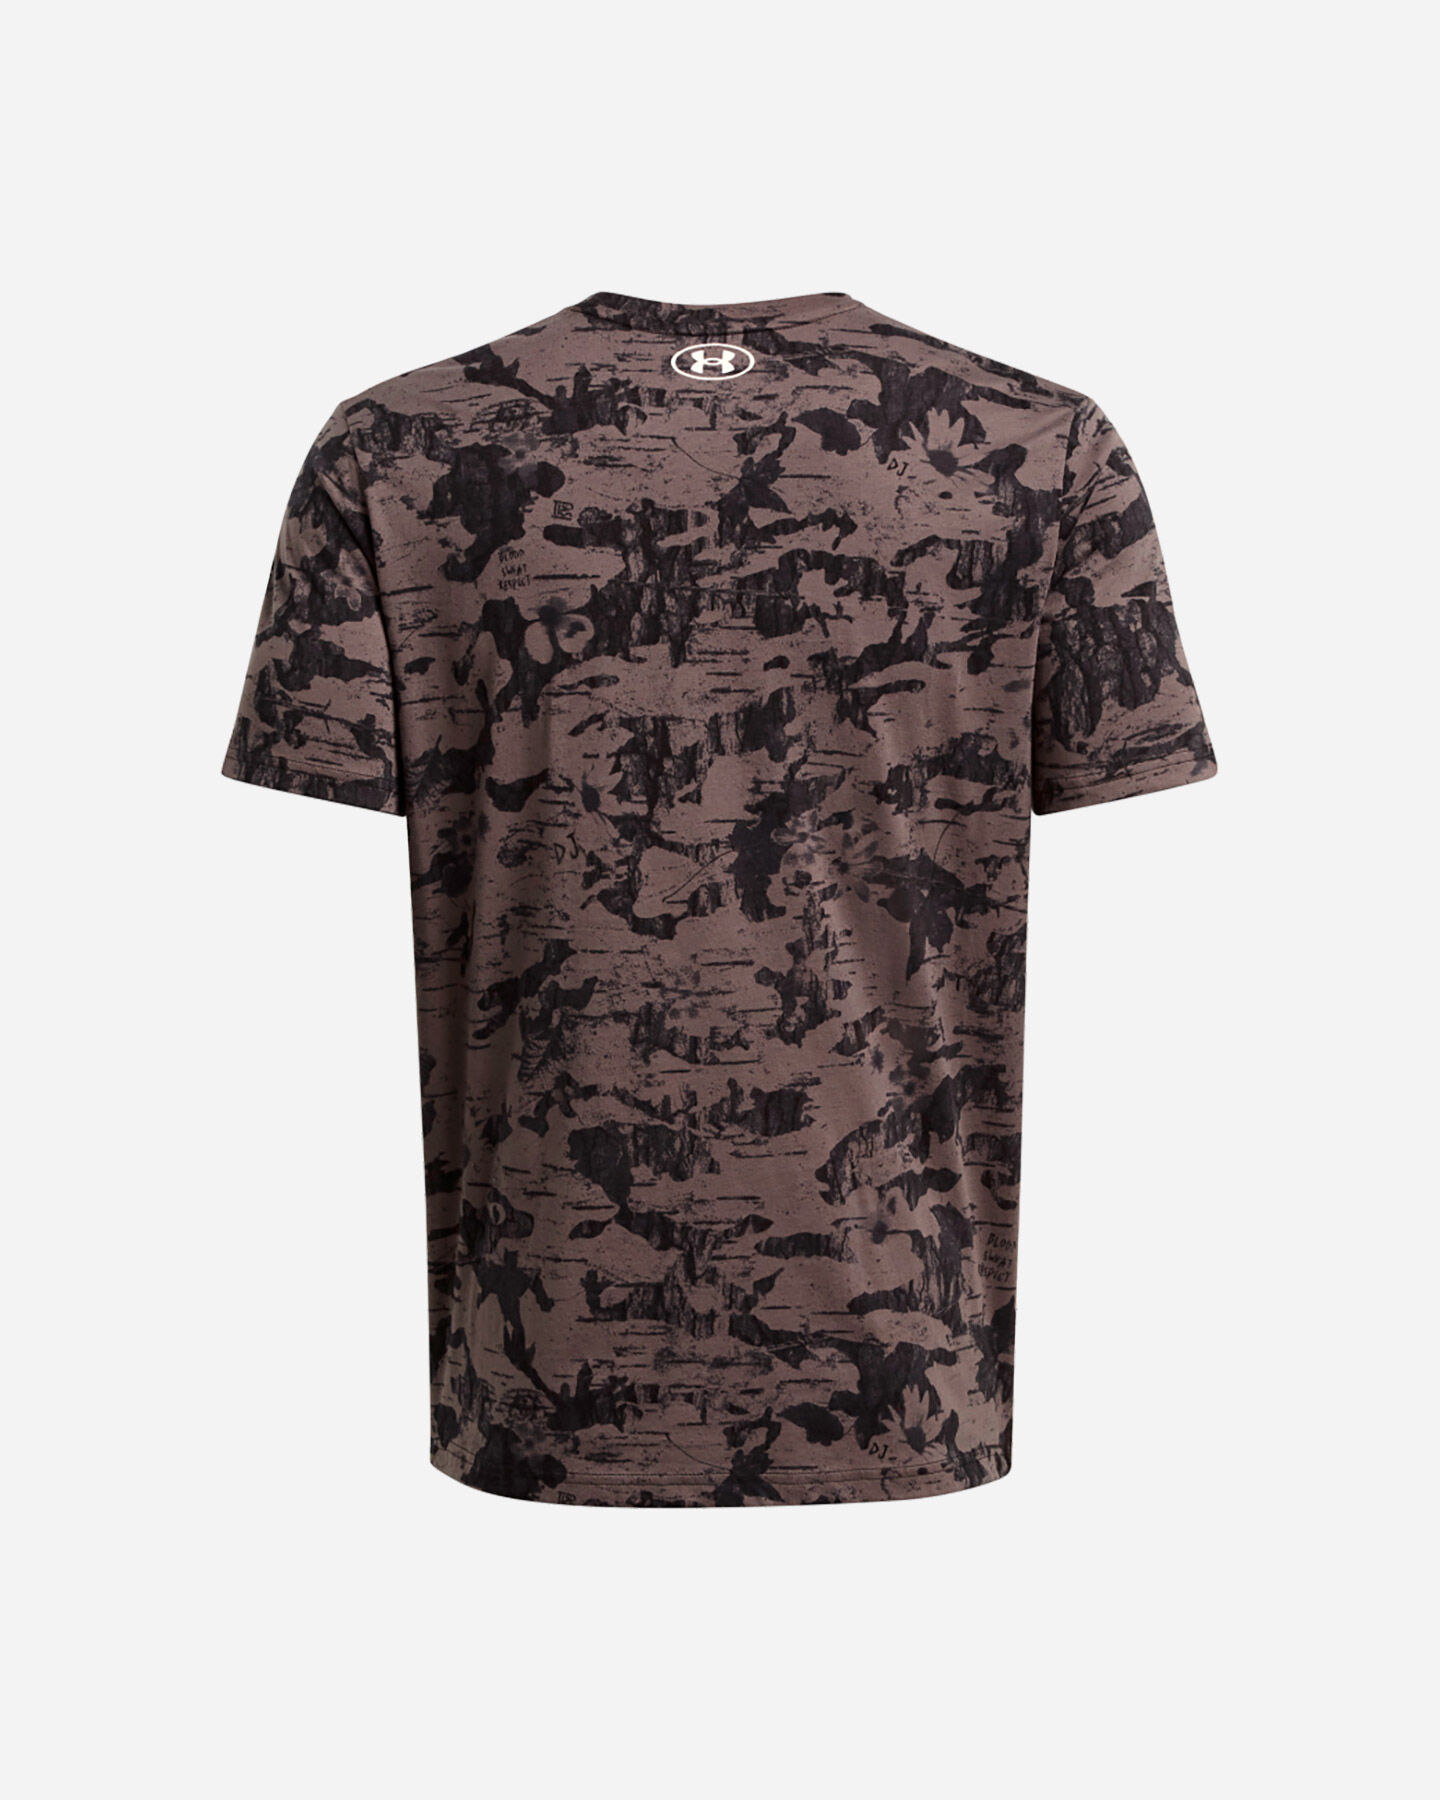  T-Shirt UNDER ARMOUR THE ROCK PJT PAYOFF M S5641731|0176|SM scatto 1